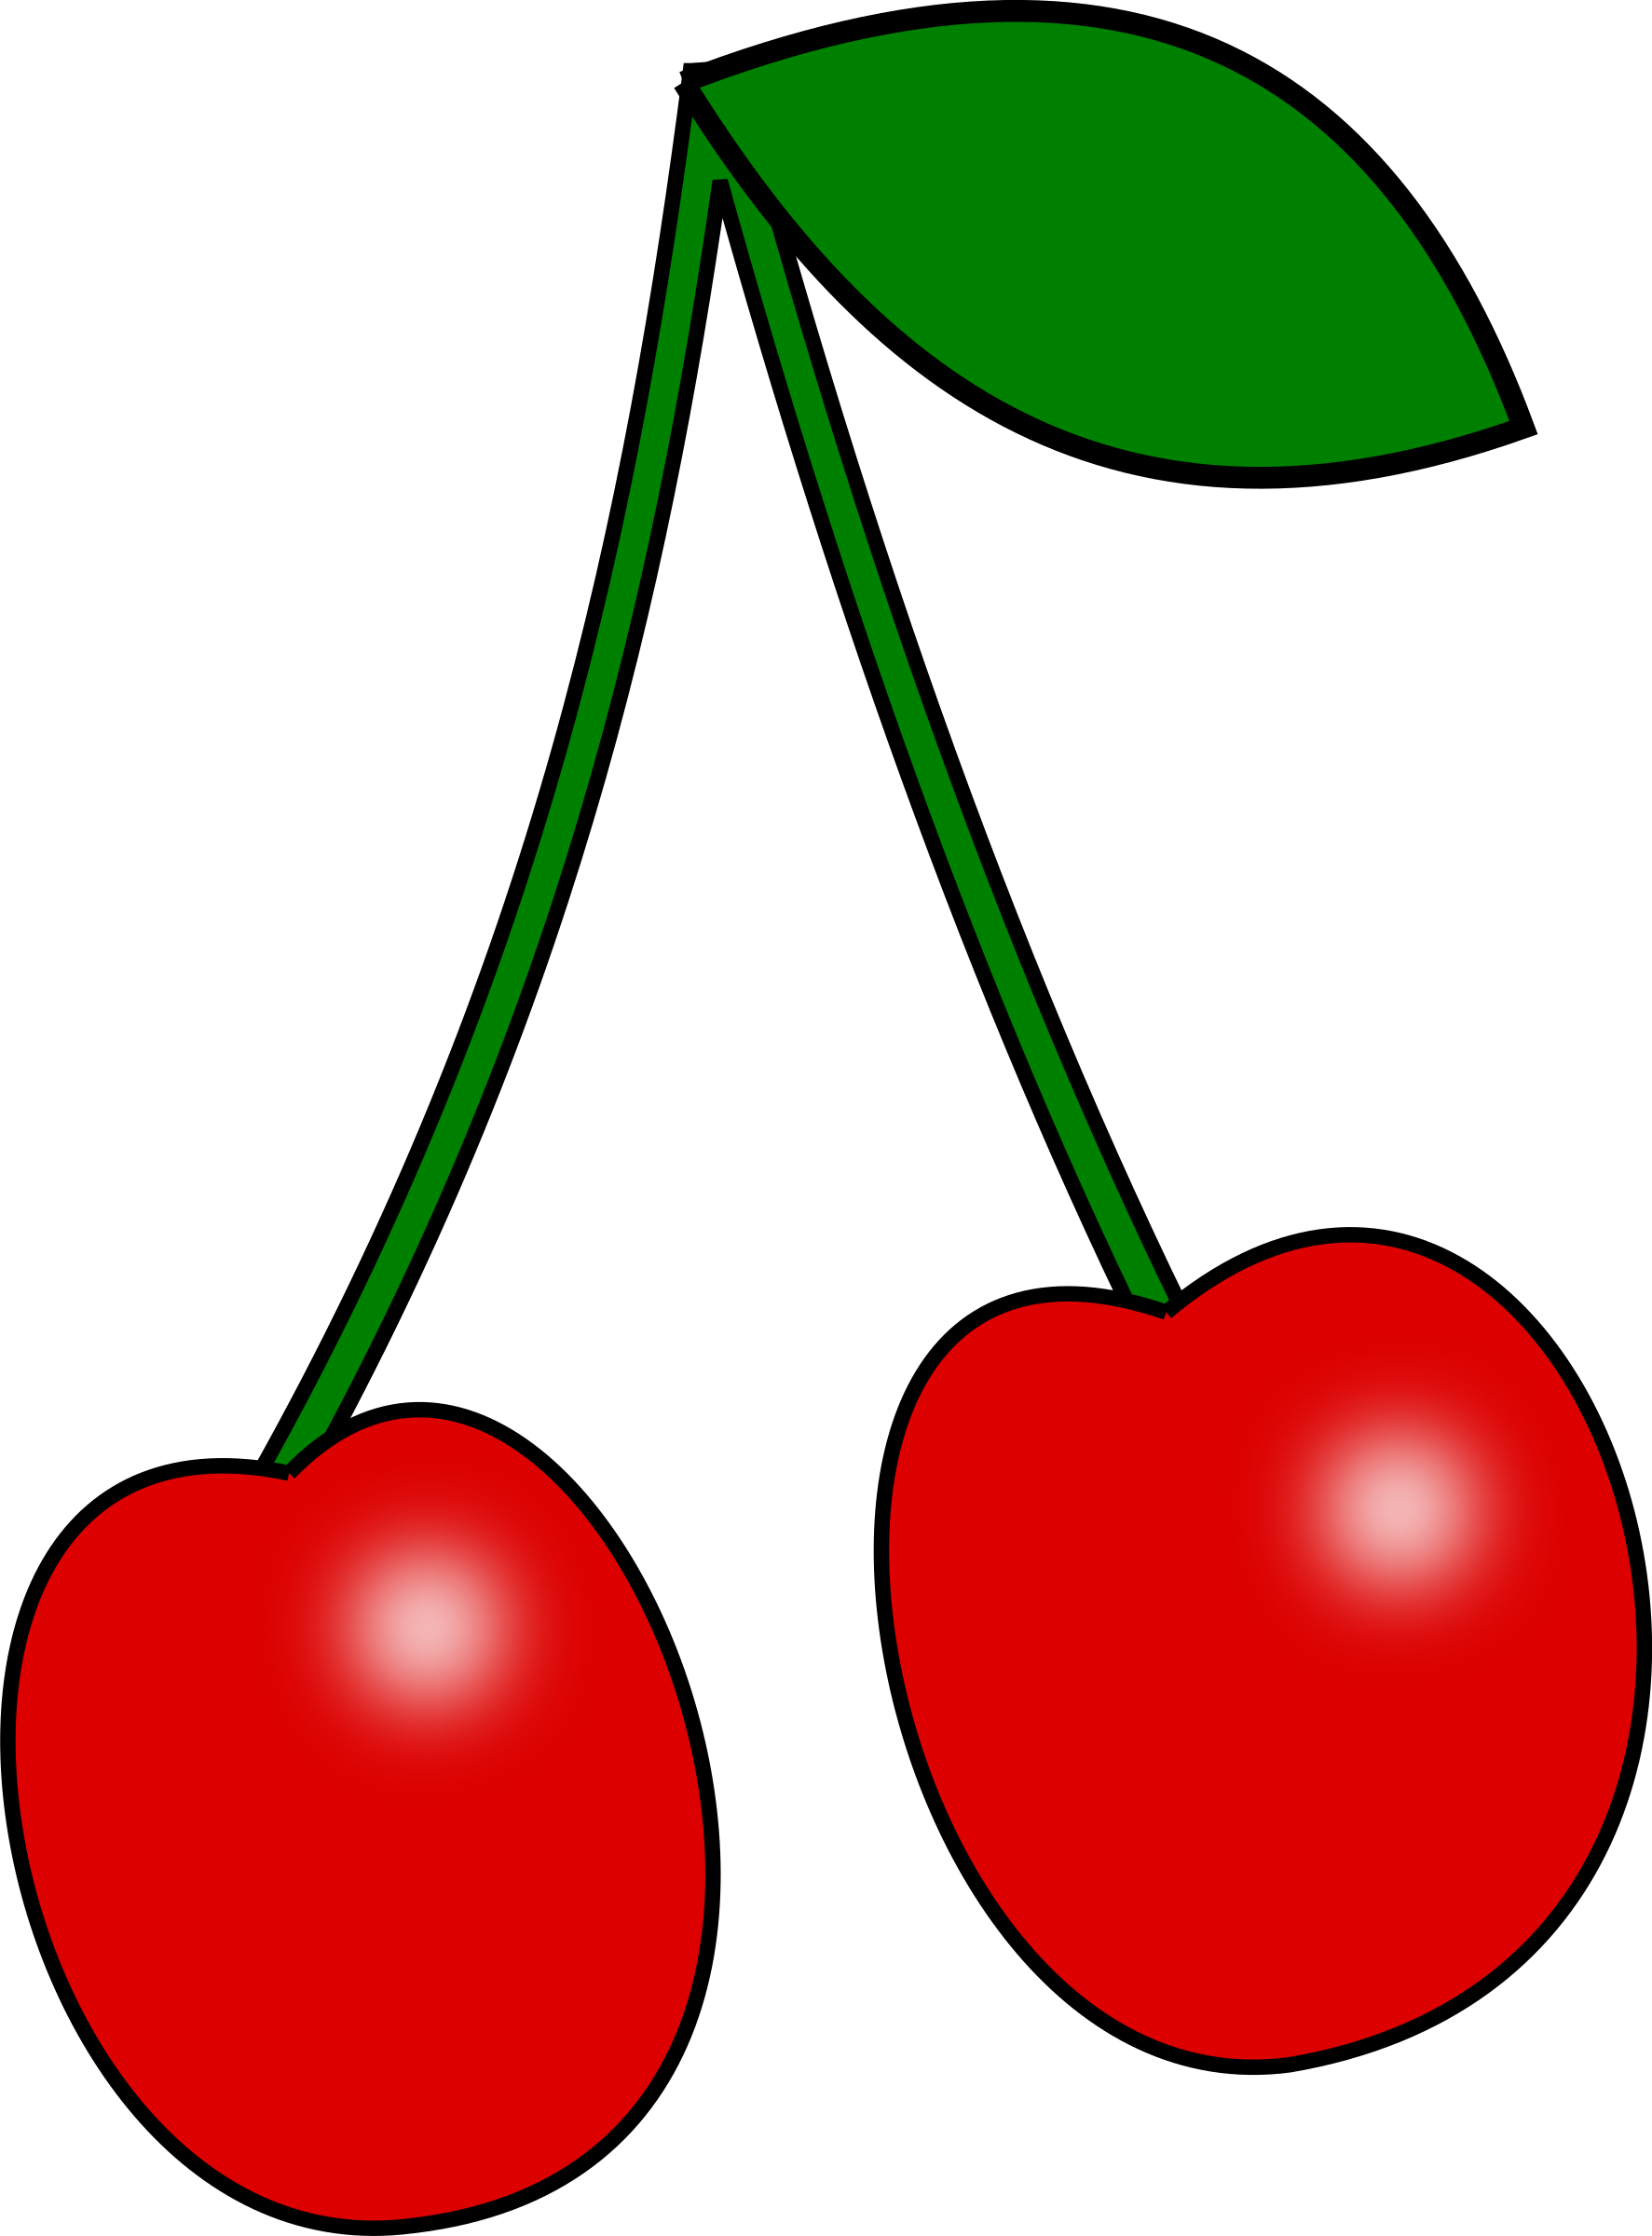 clipart leaf cherry